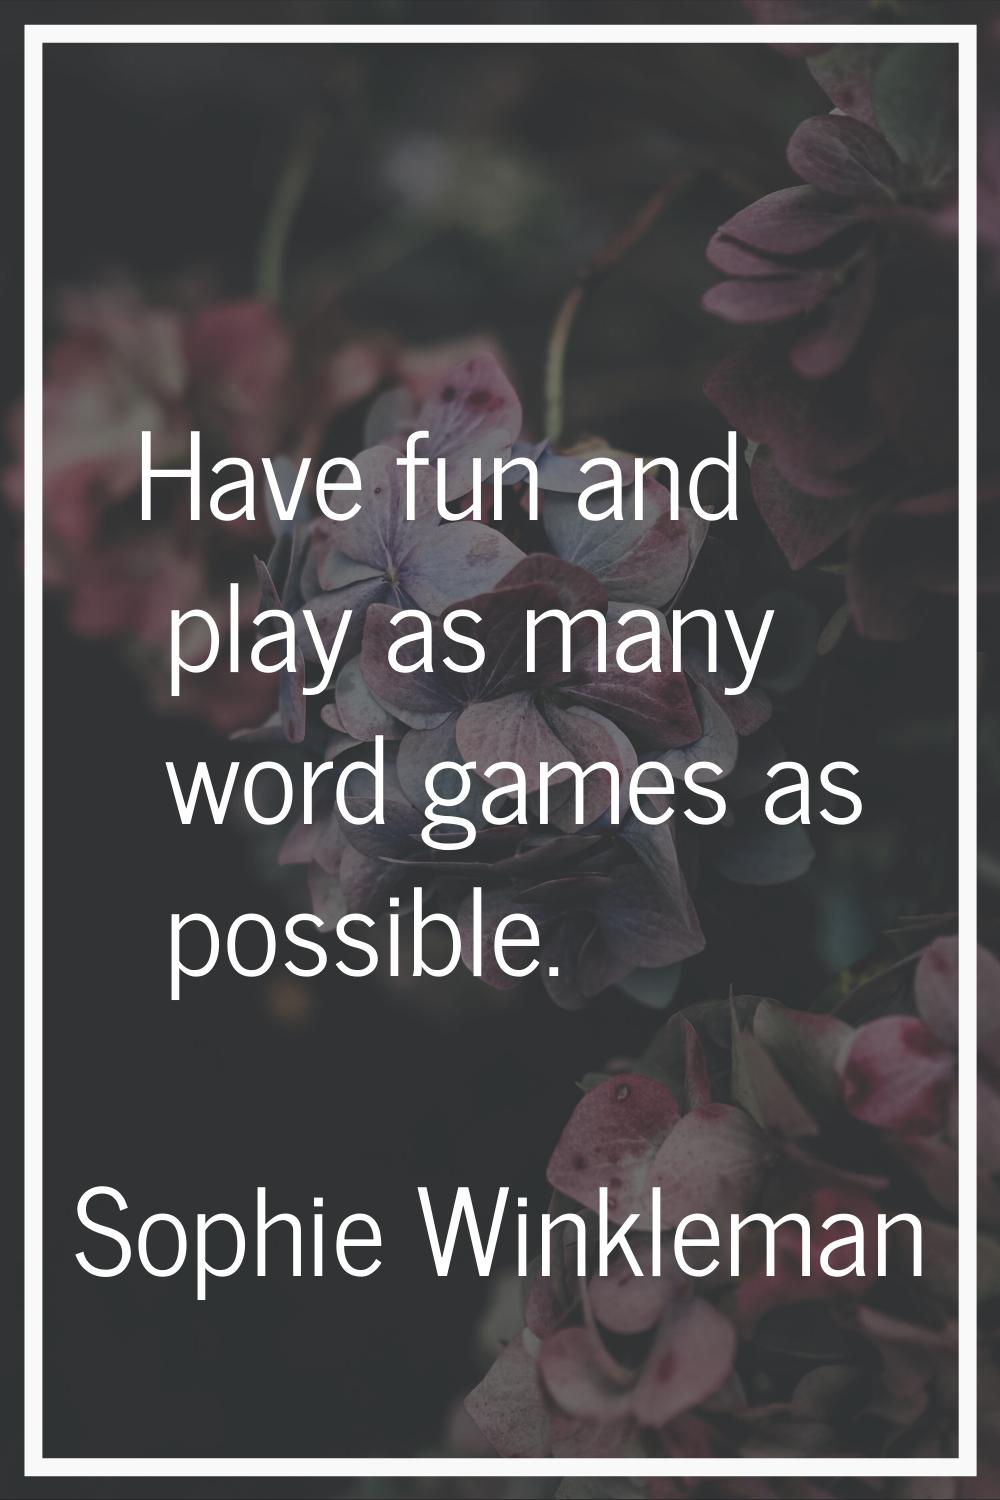 Have fun and play as many word games as possible.